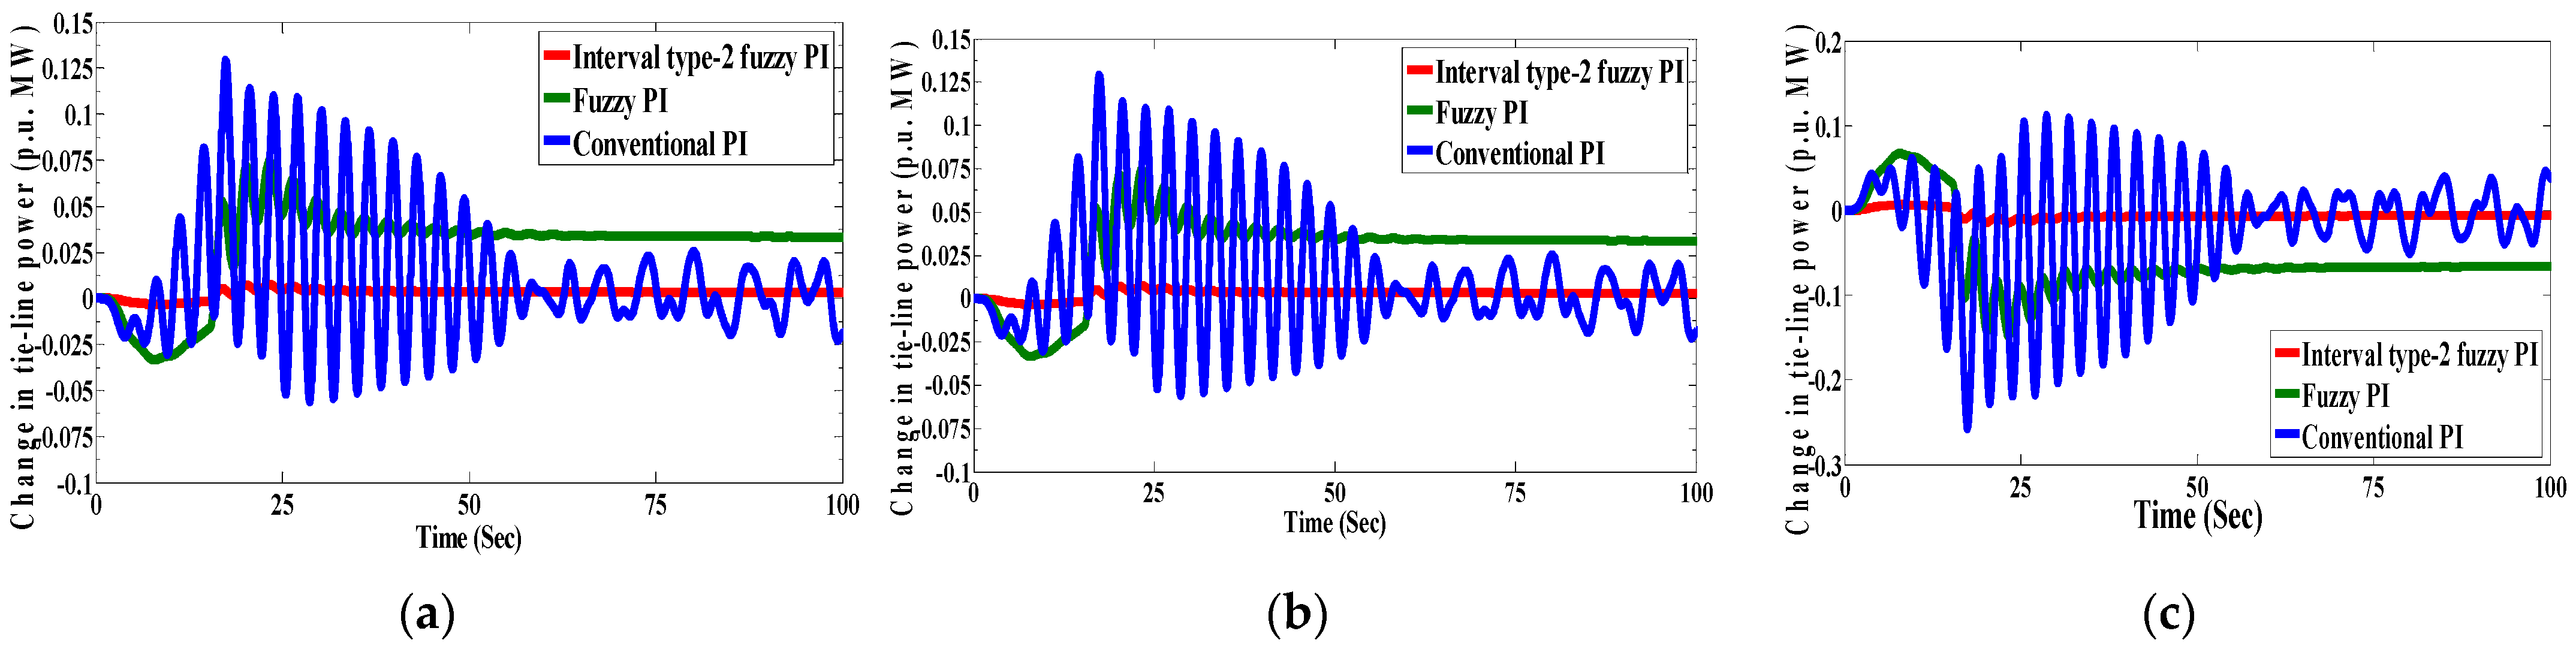 area normalization of signal in matlab 2017